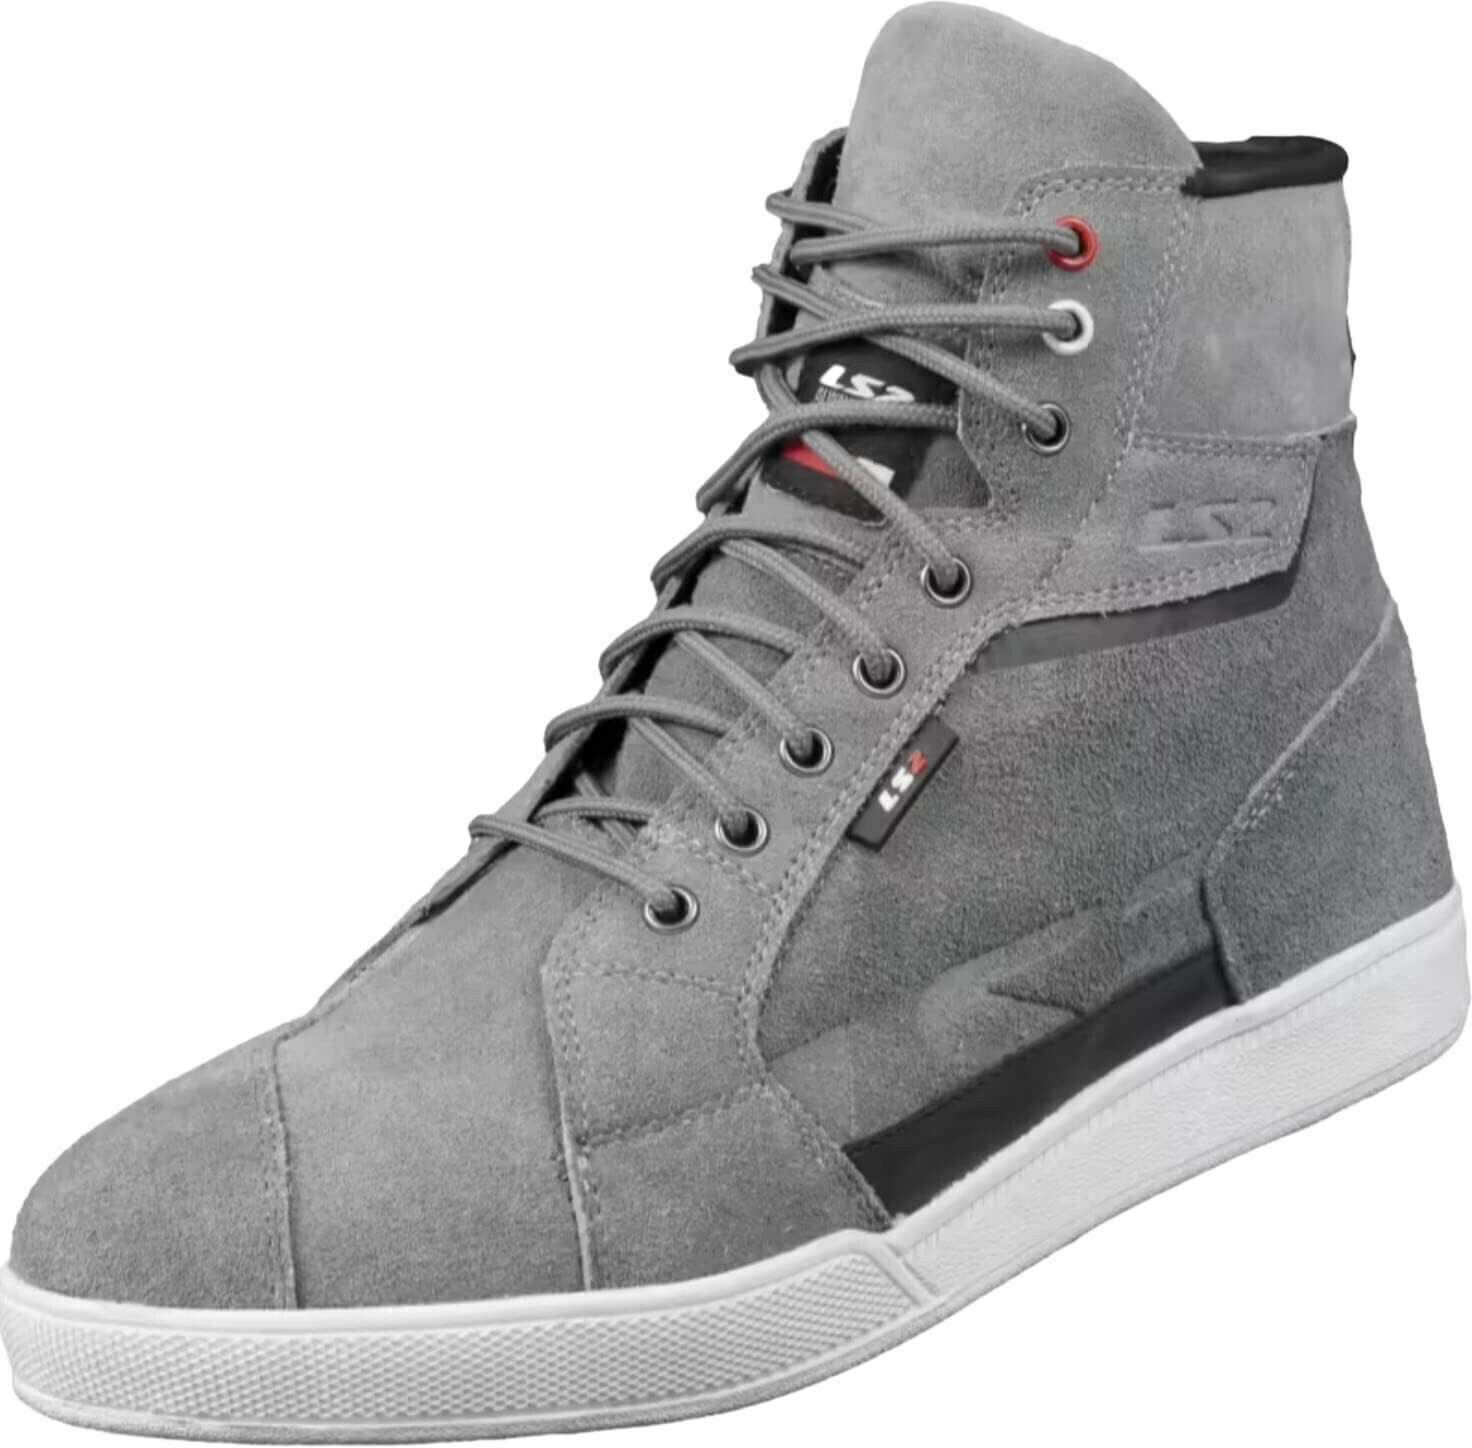 Photos - Motorcycle Boots LS2 Helmets  Downtown Wp Urban Boots light grey 